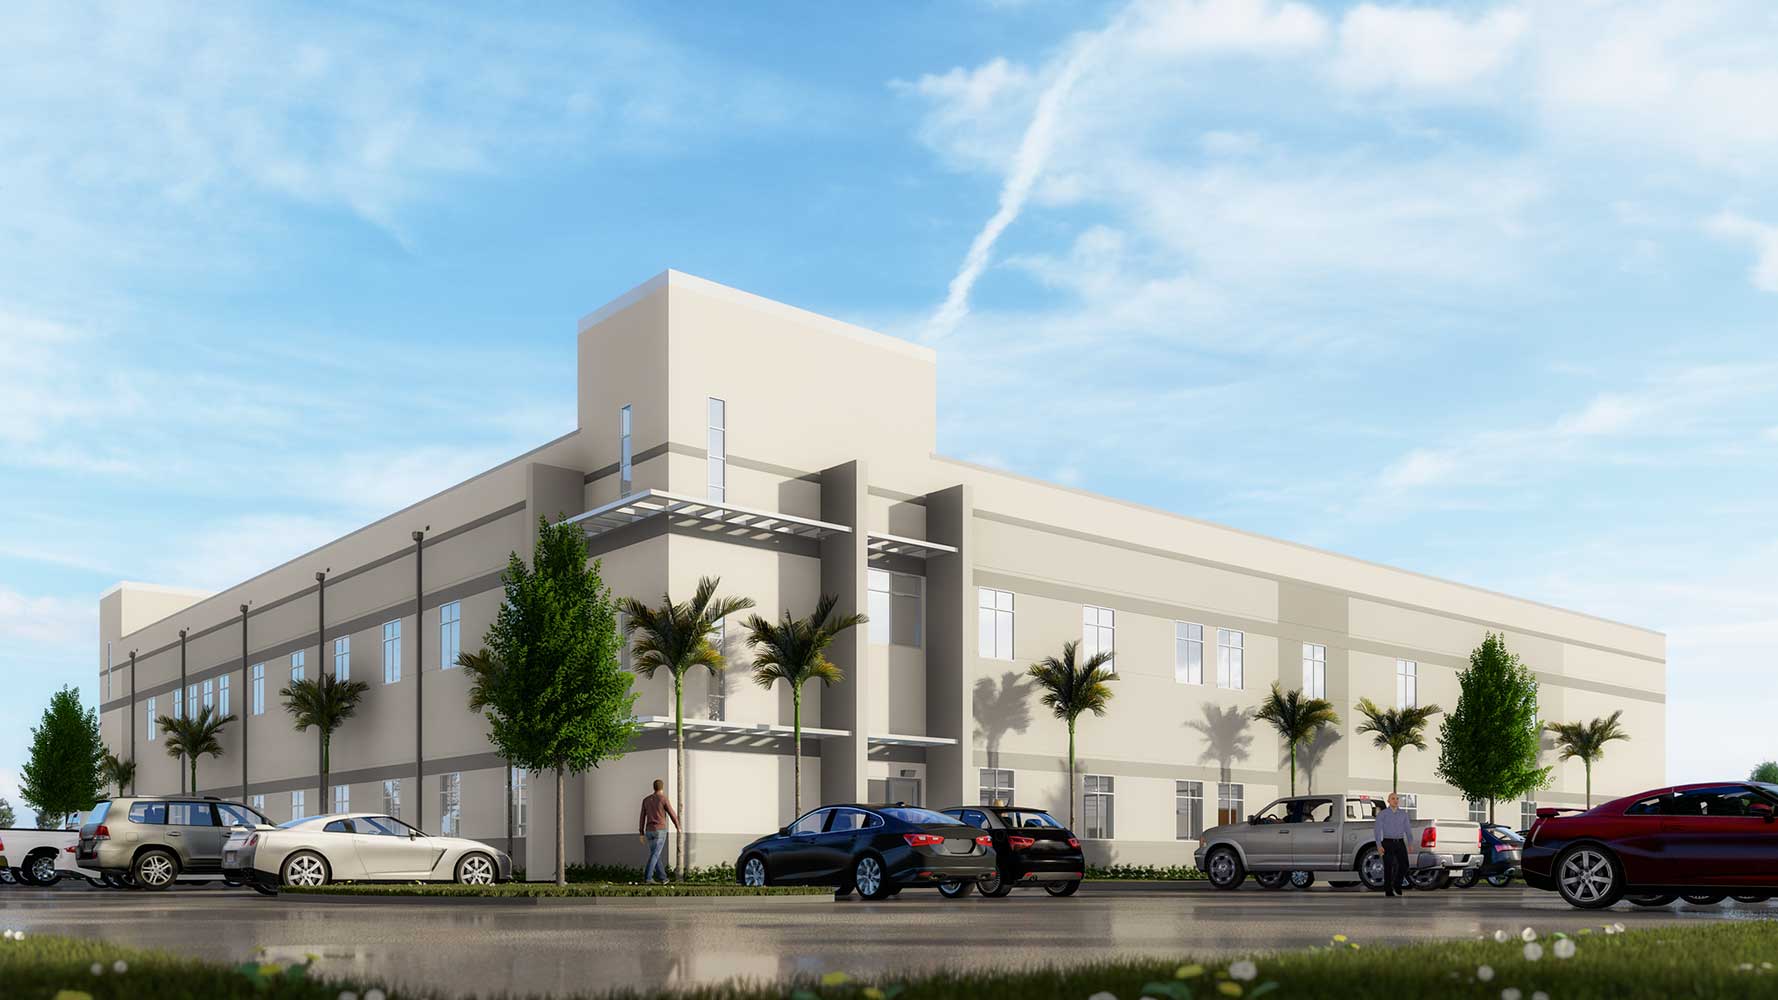 White and gray exterior building with cars parked